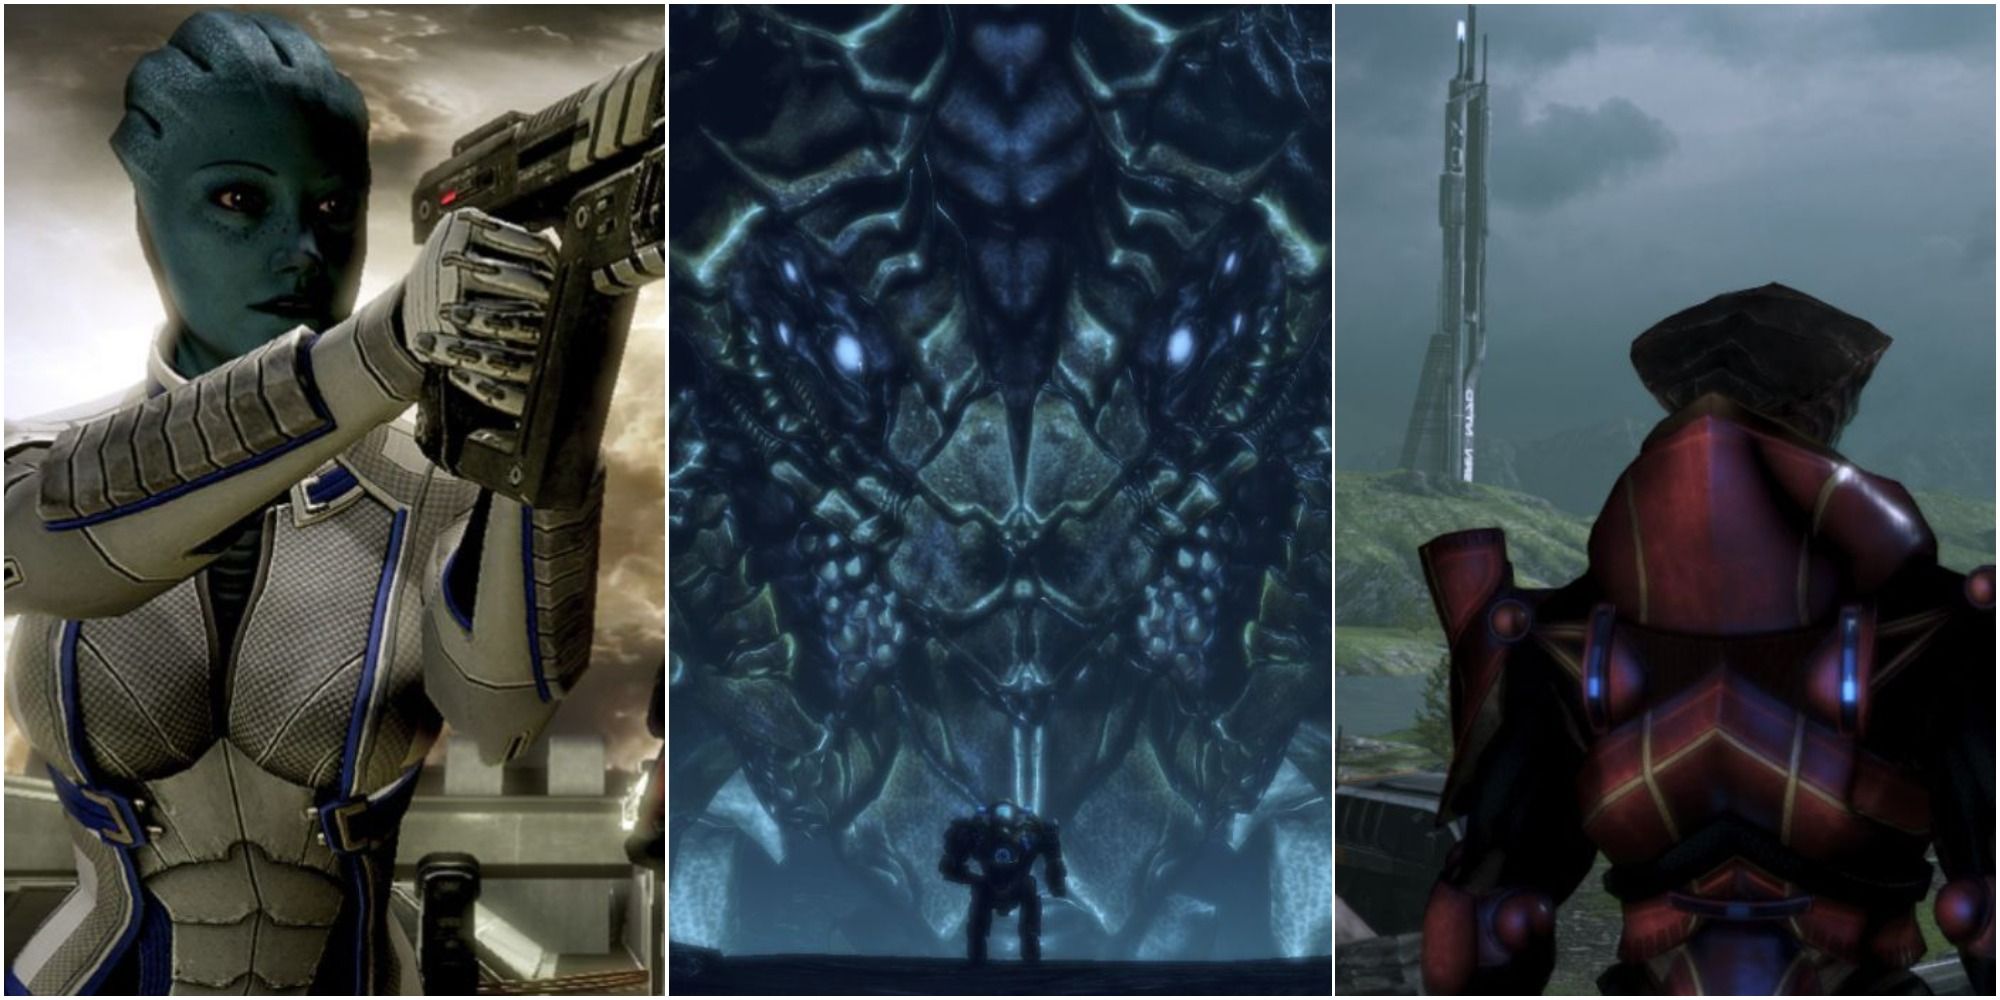 Liara aiming her gun from Lair of the Shadow Broker, Shepard meeting the Leviathans, and Javik on Eden Prime, left to right